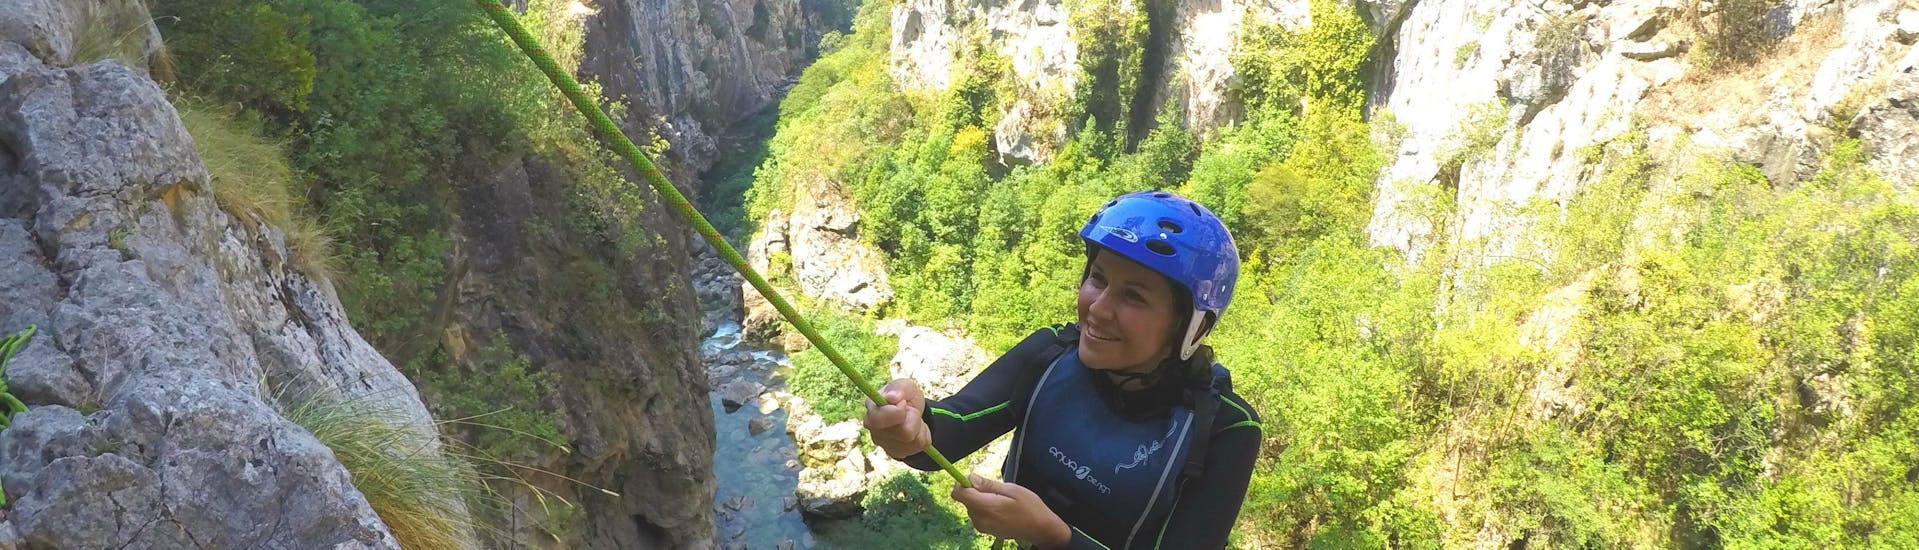 Canyoning in the Cetina River near Omiš - Extreme Tour with Dalmare Travel Agency Omiš - Hero image